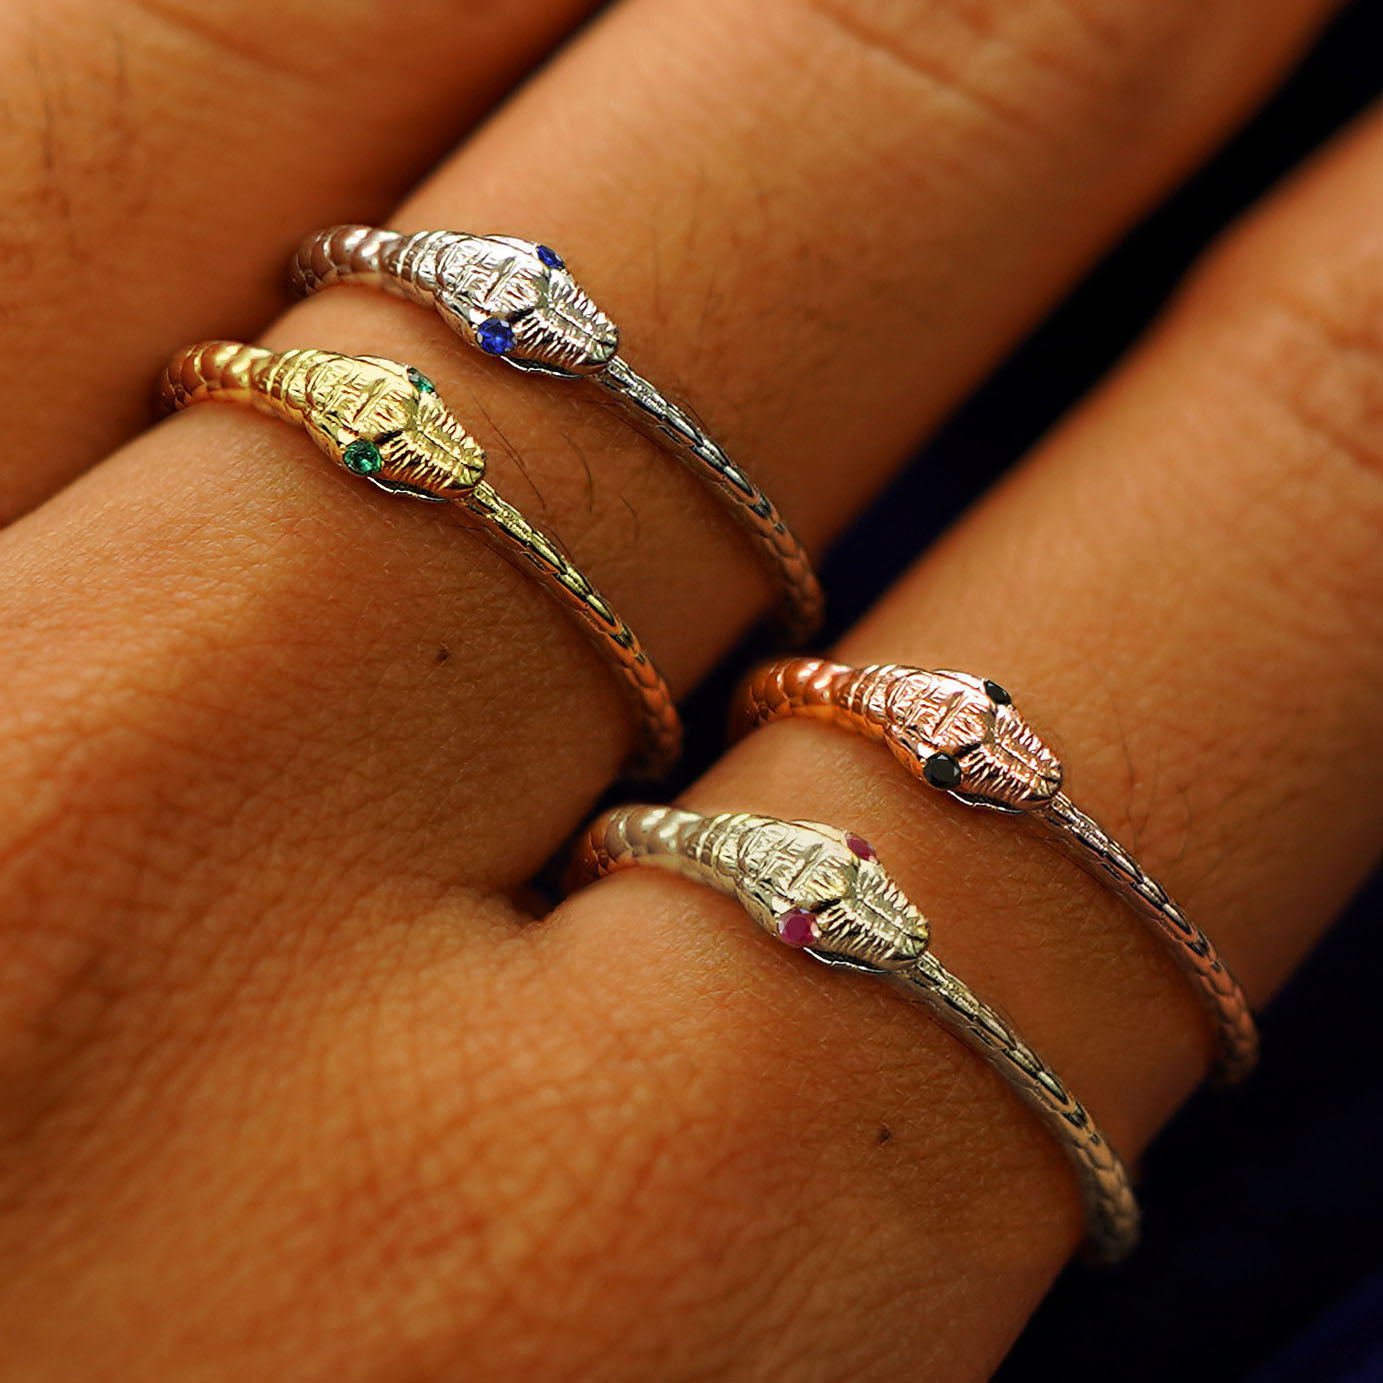 A model's hand wearing four versions of the Gemstone Ouroboros ring in variations of yellow, white, rose, and champagne gold